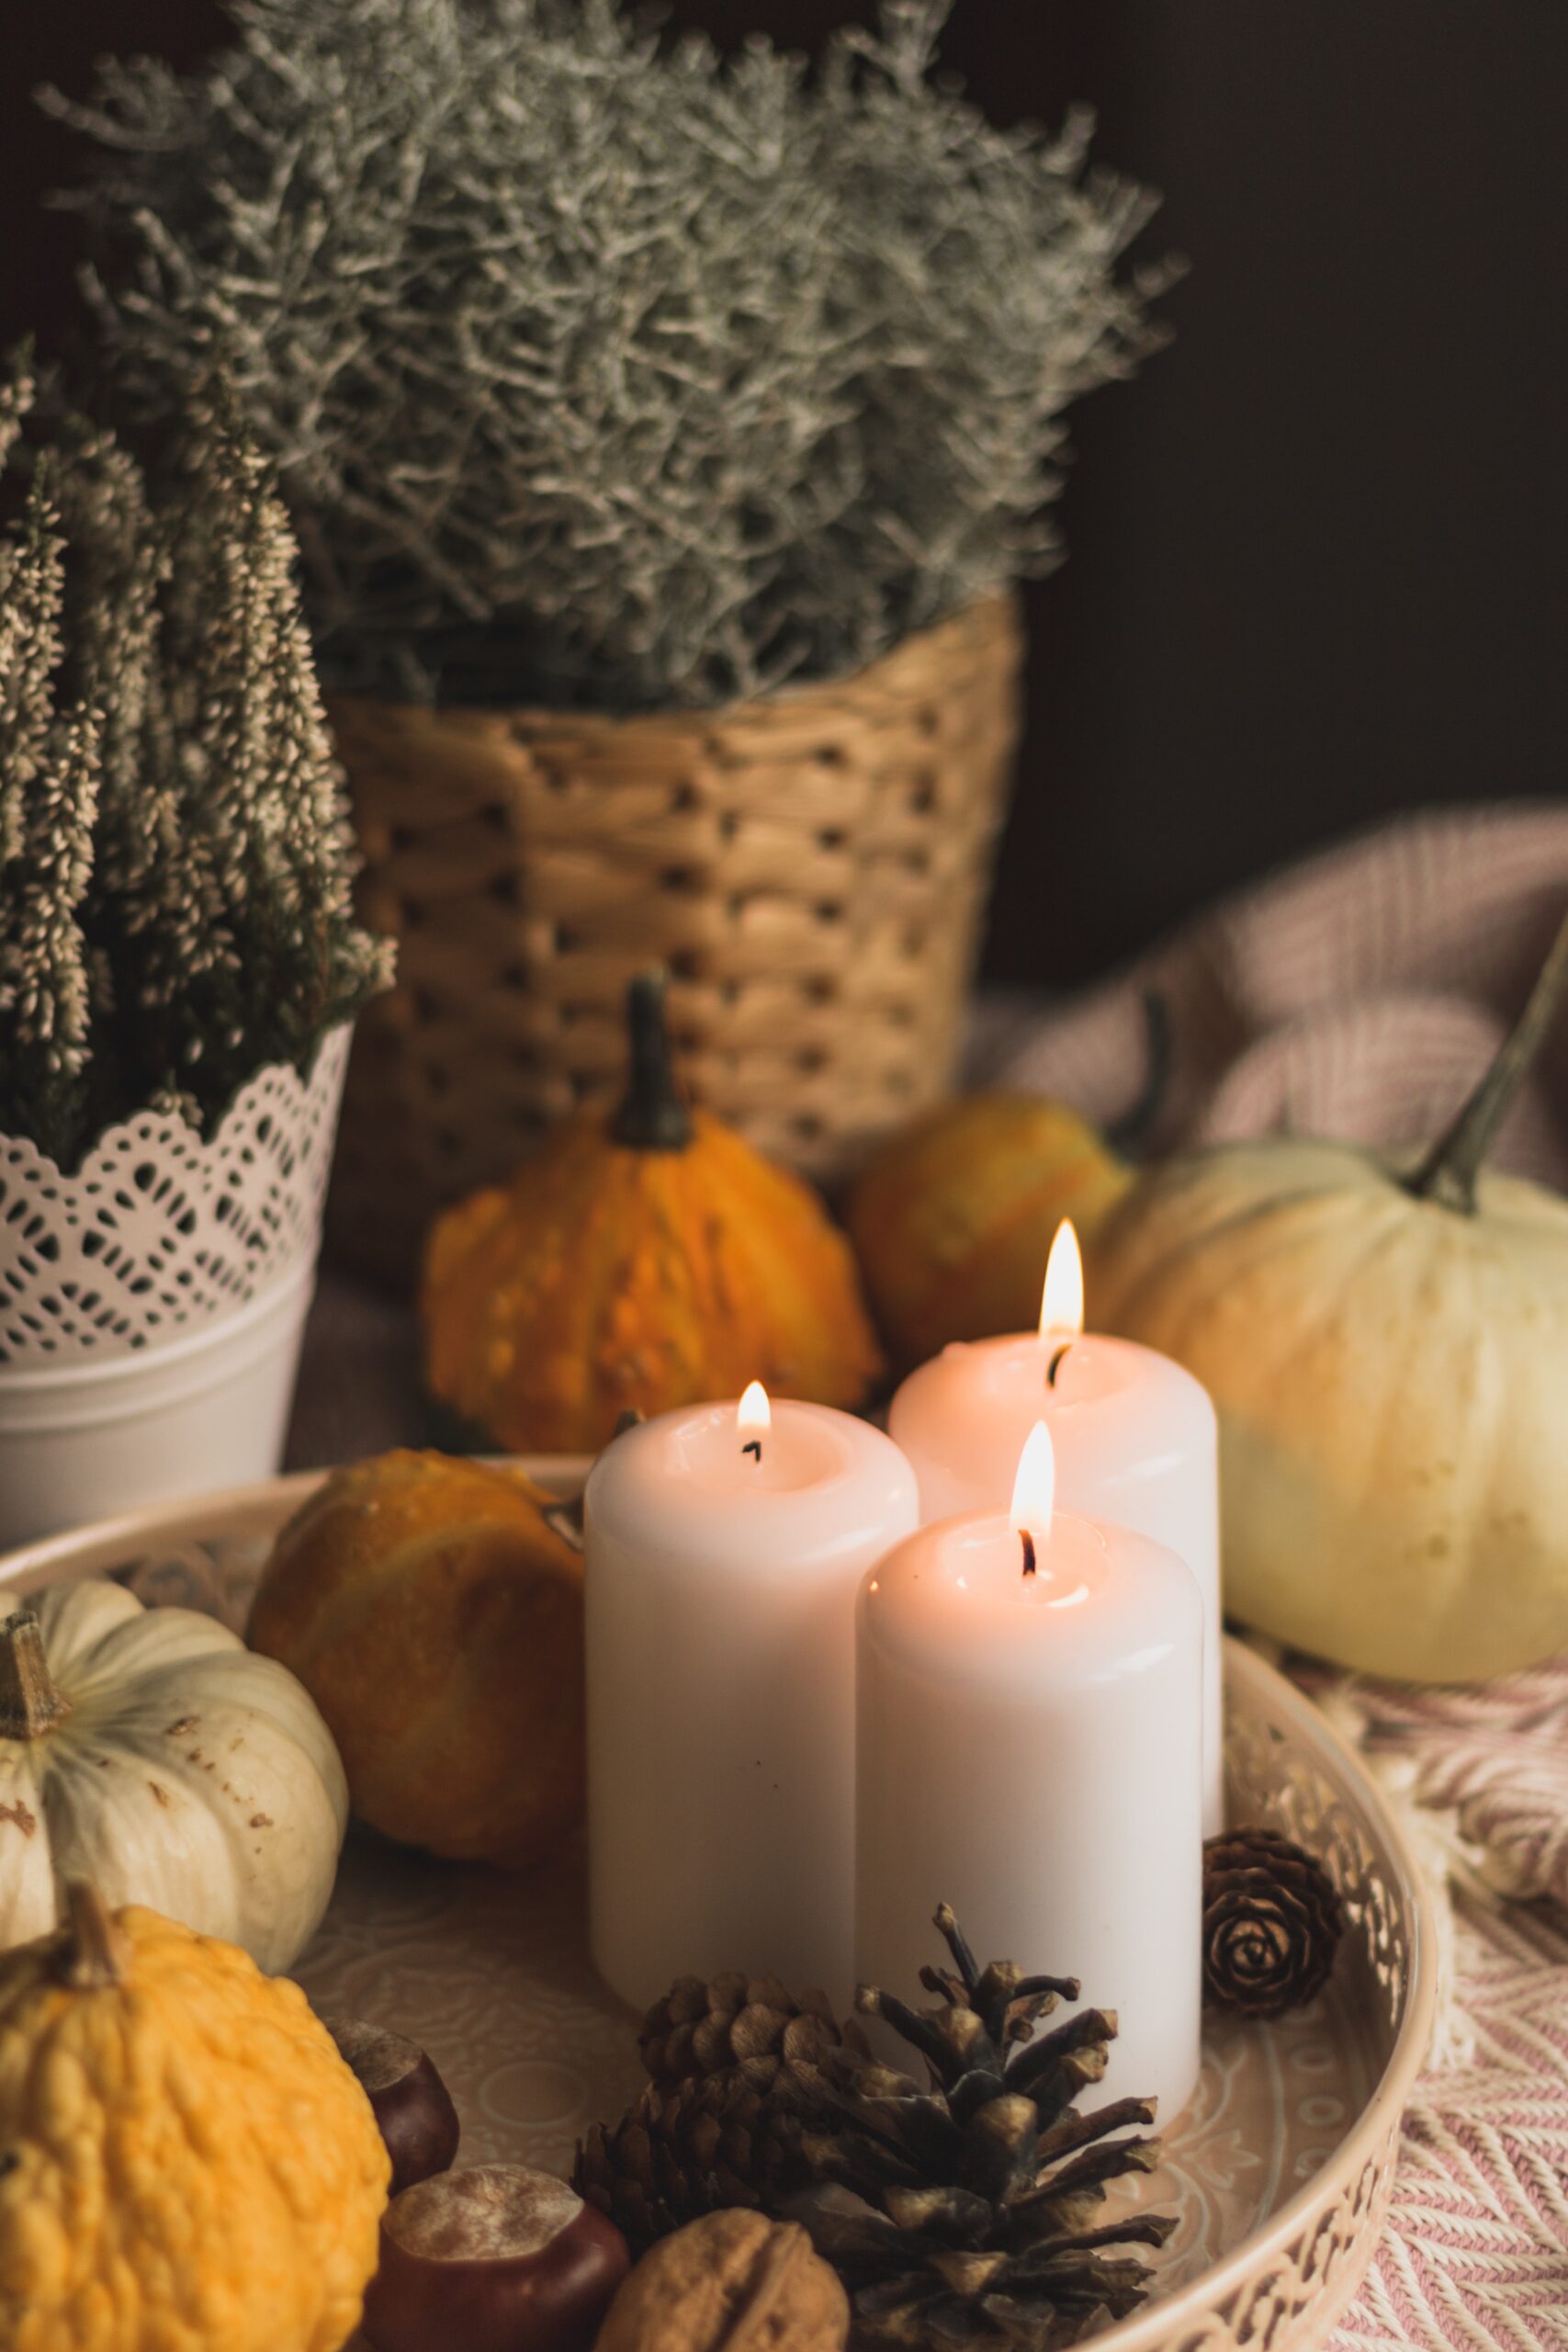 Three Reasons to Change Your Decor in the Fall. Photo by svitlana on Unsplash.